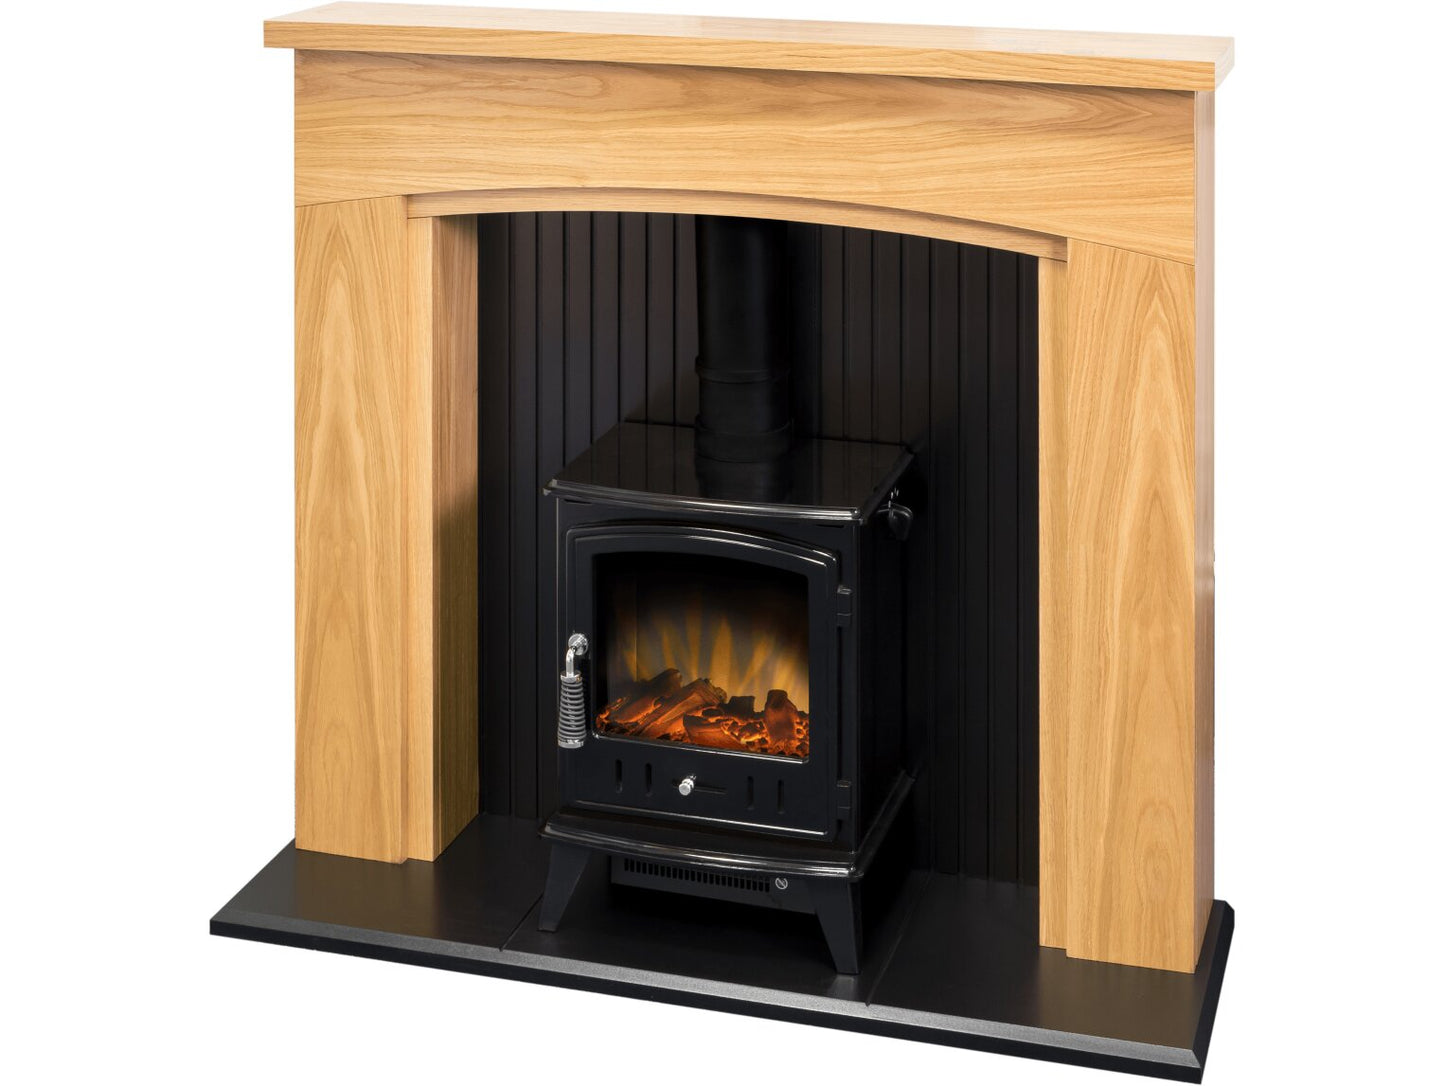 Adam Turin Stove Suite with Aviemore Electric Stove 48 Inch 21430 Oak & Black